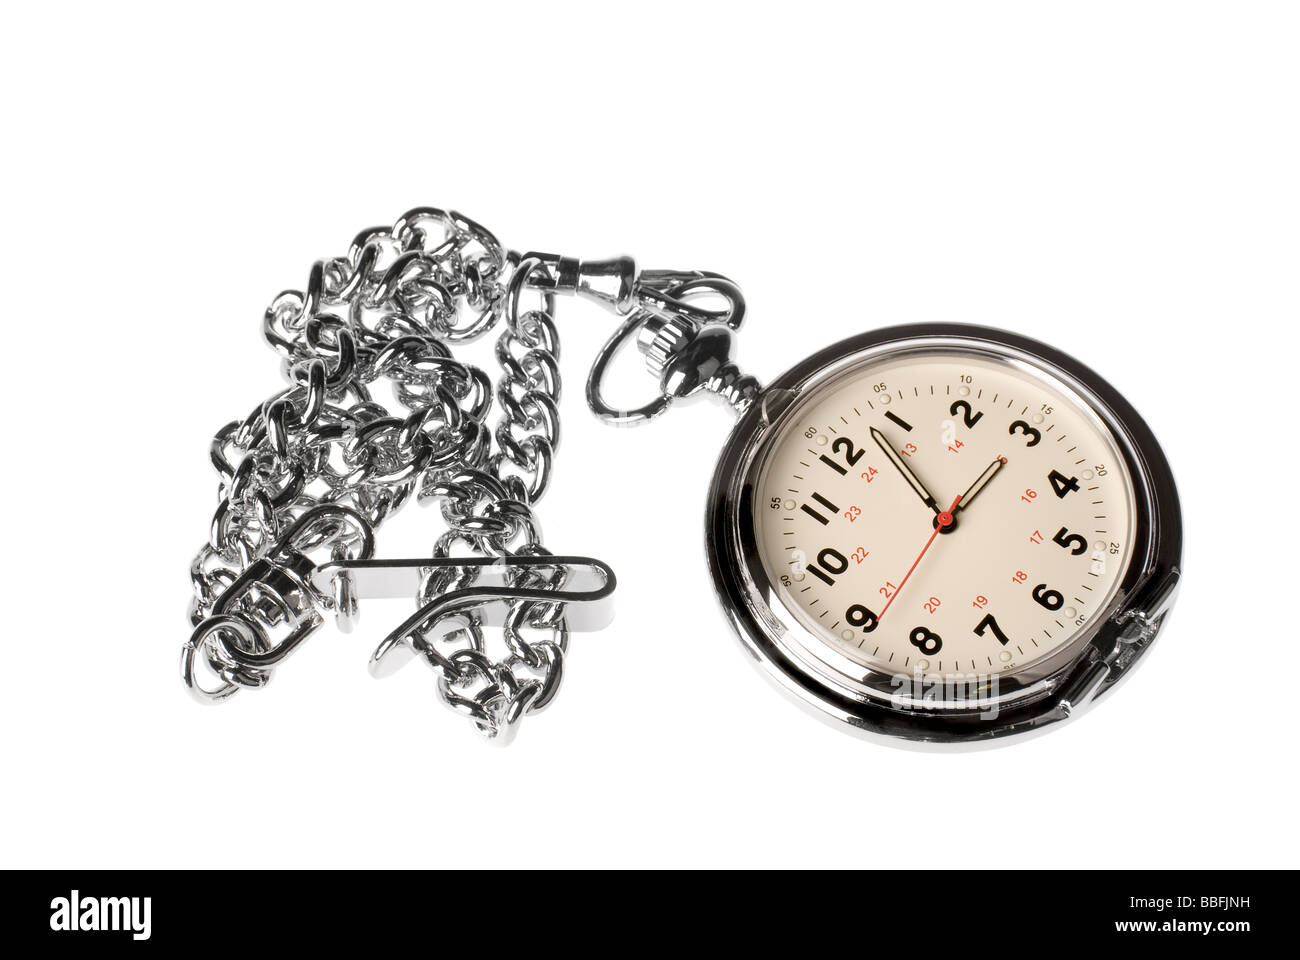 A silver chrome pocket watch with decorative chain and watch isolated on a white background Stock Photo